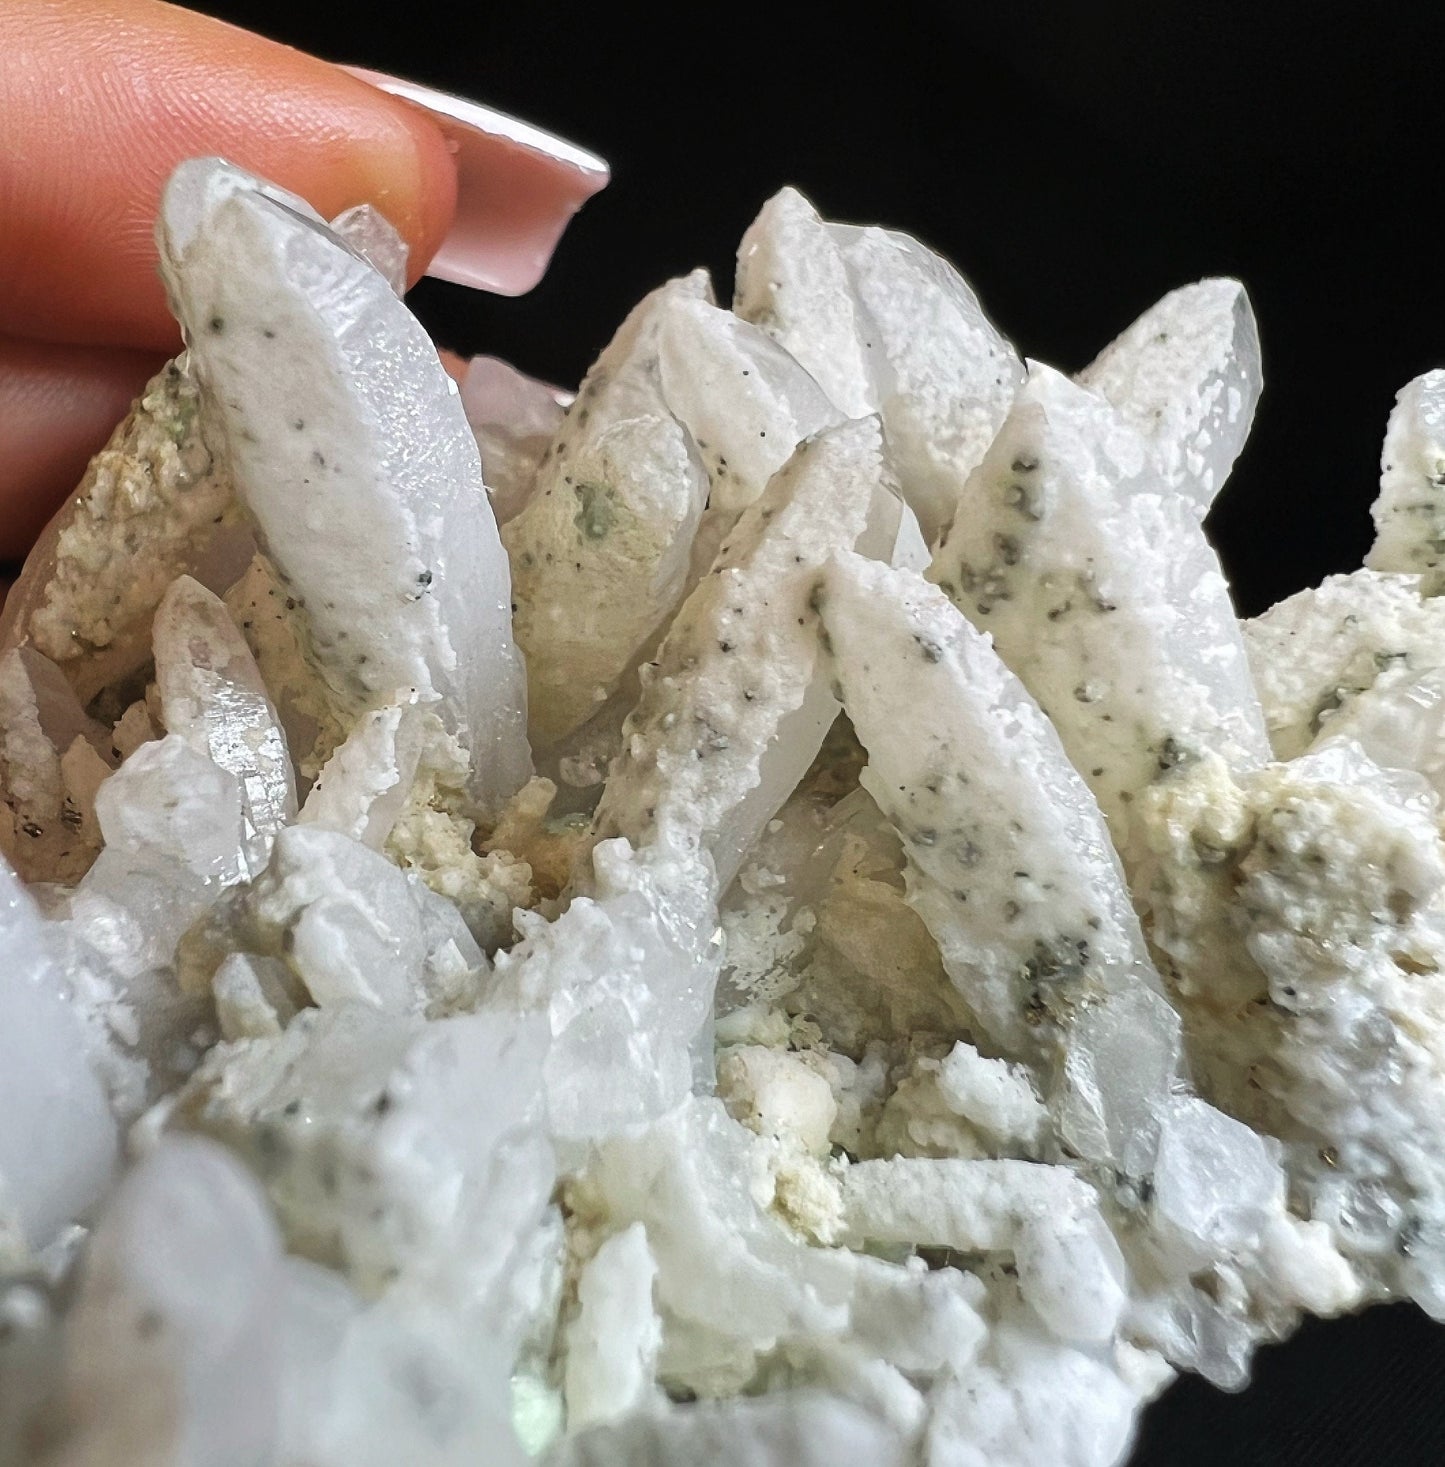 Calcite On Quartz With Pyrite Inclusions From Pachapaqui, Ancash, Peru- Statement Piece, Collectors Piece, Gift (Stand Not Included)